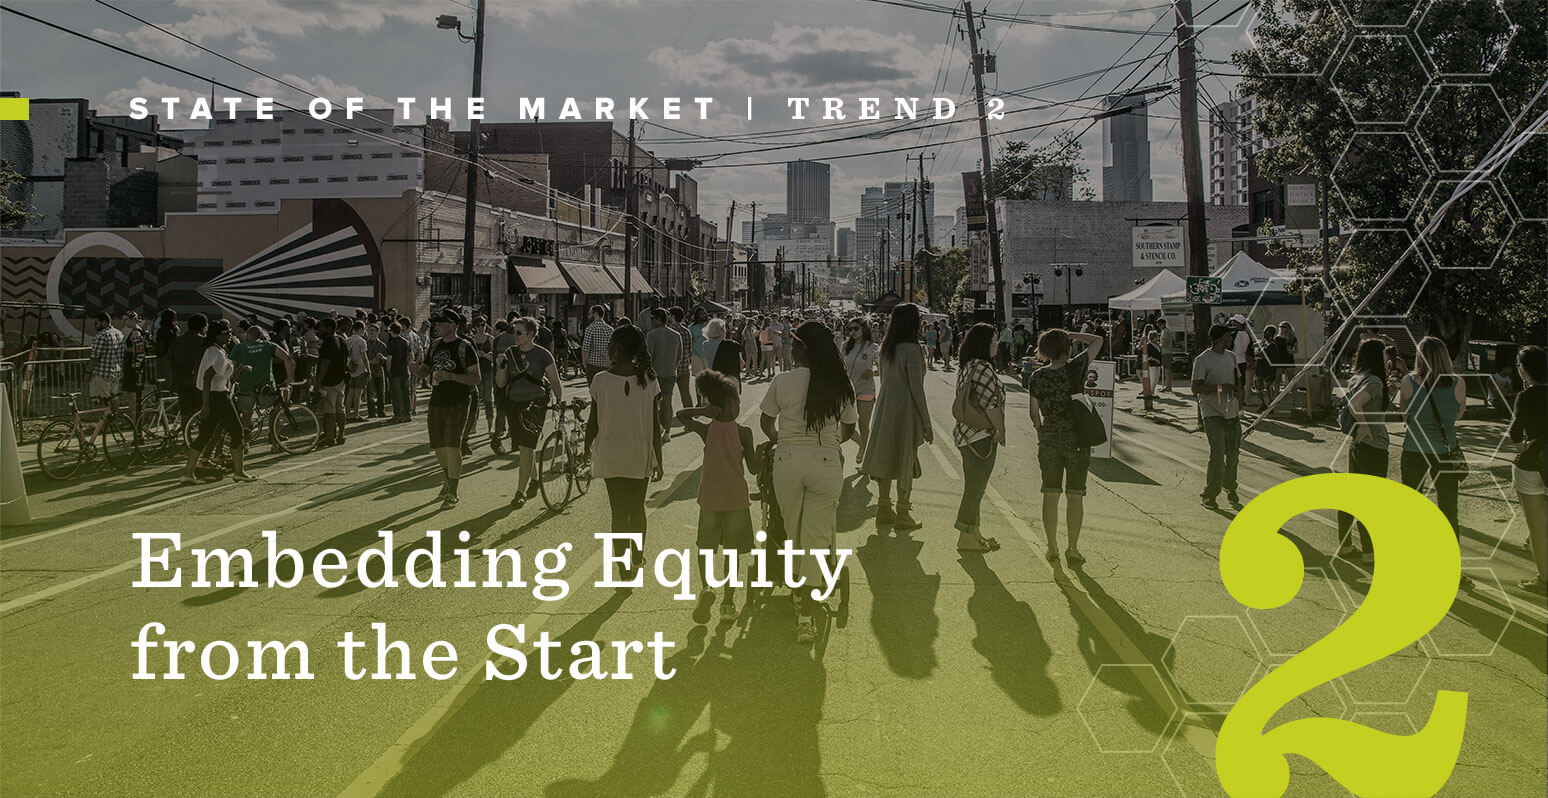 State of the Market: Trend 2 - Embedding Equity from the Start